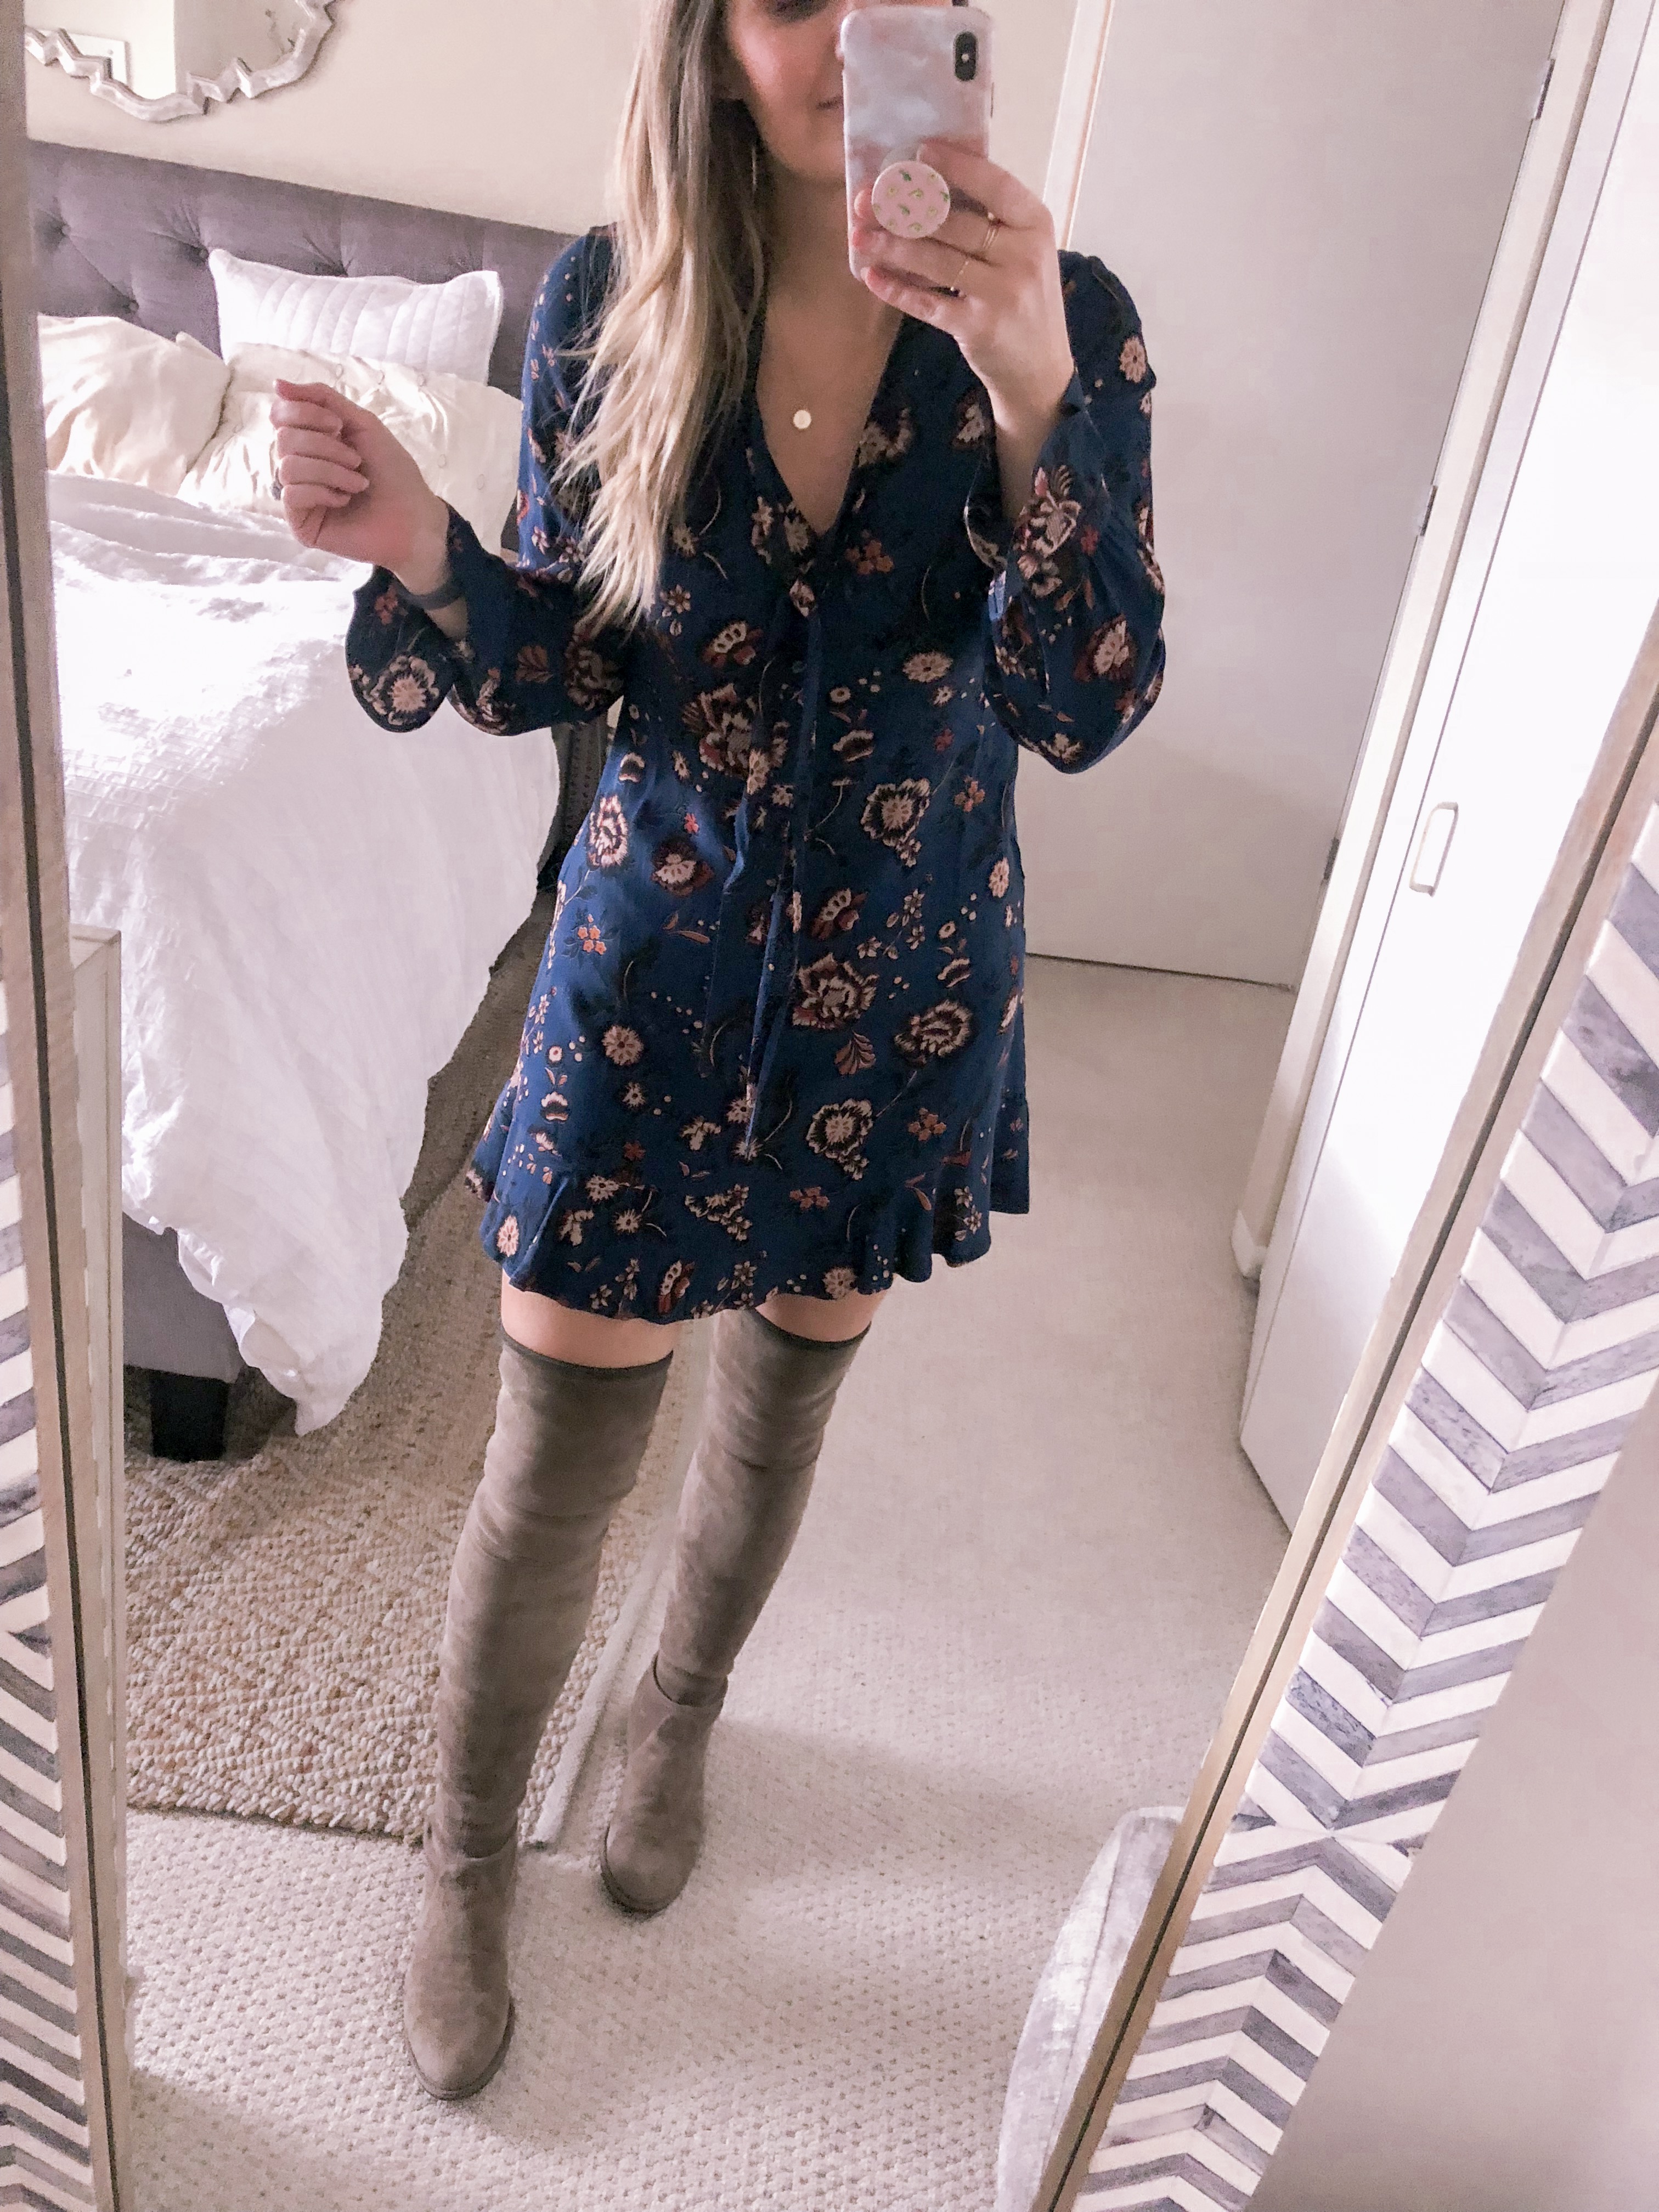 Chicago fashion blogger Visions of Vogue styles a navy floral dress with taupe over the knee boots for work to weekend outfit inspiration.